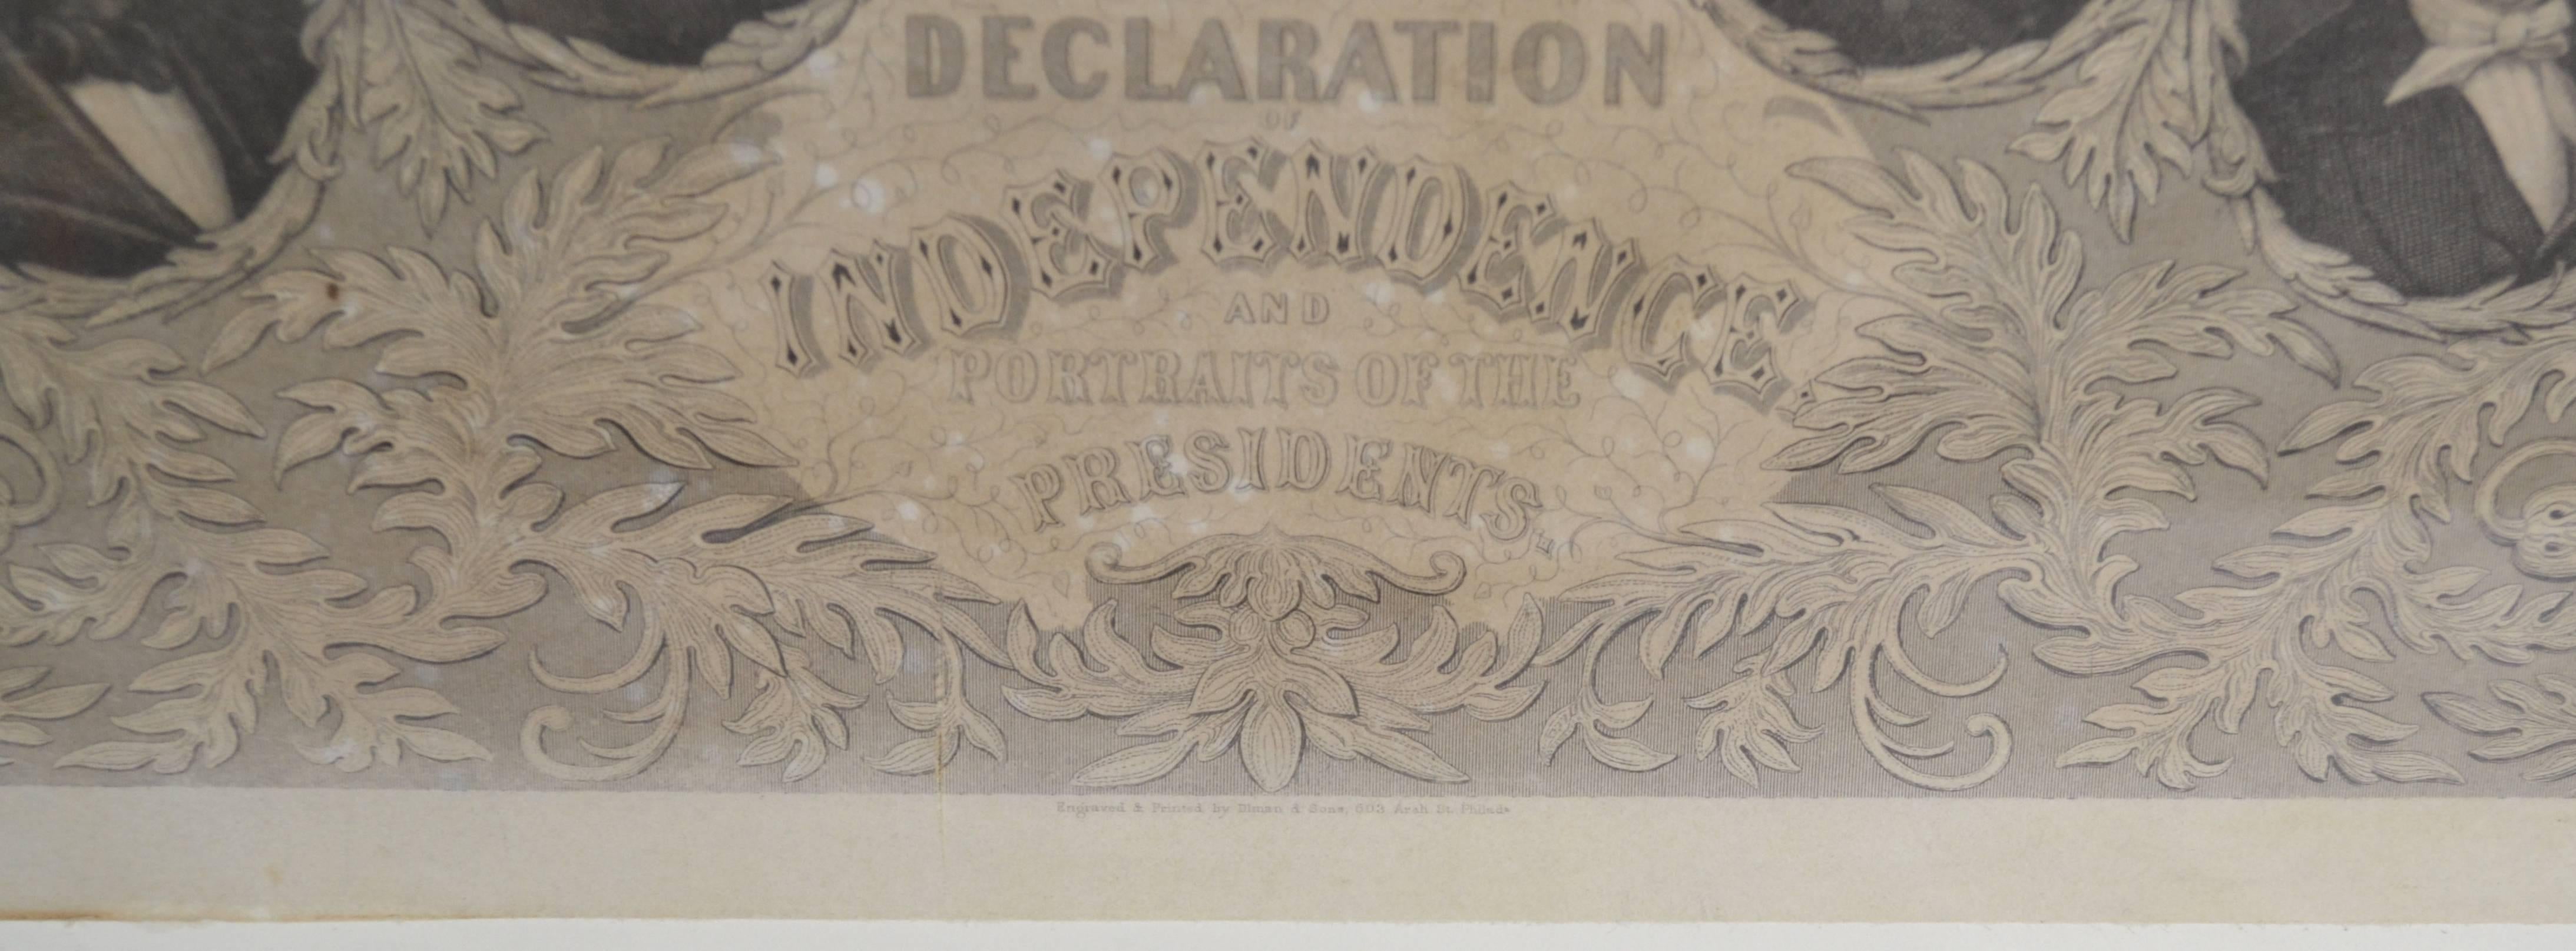 Engraved 1857 Printing of the Declaration of Independence